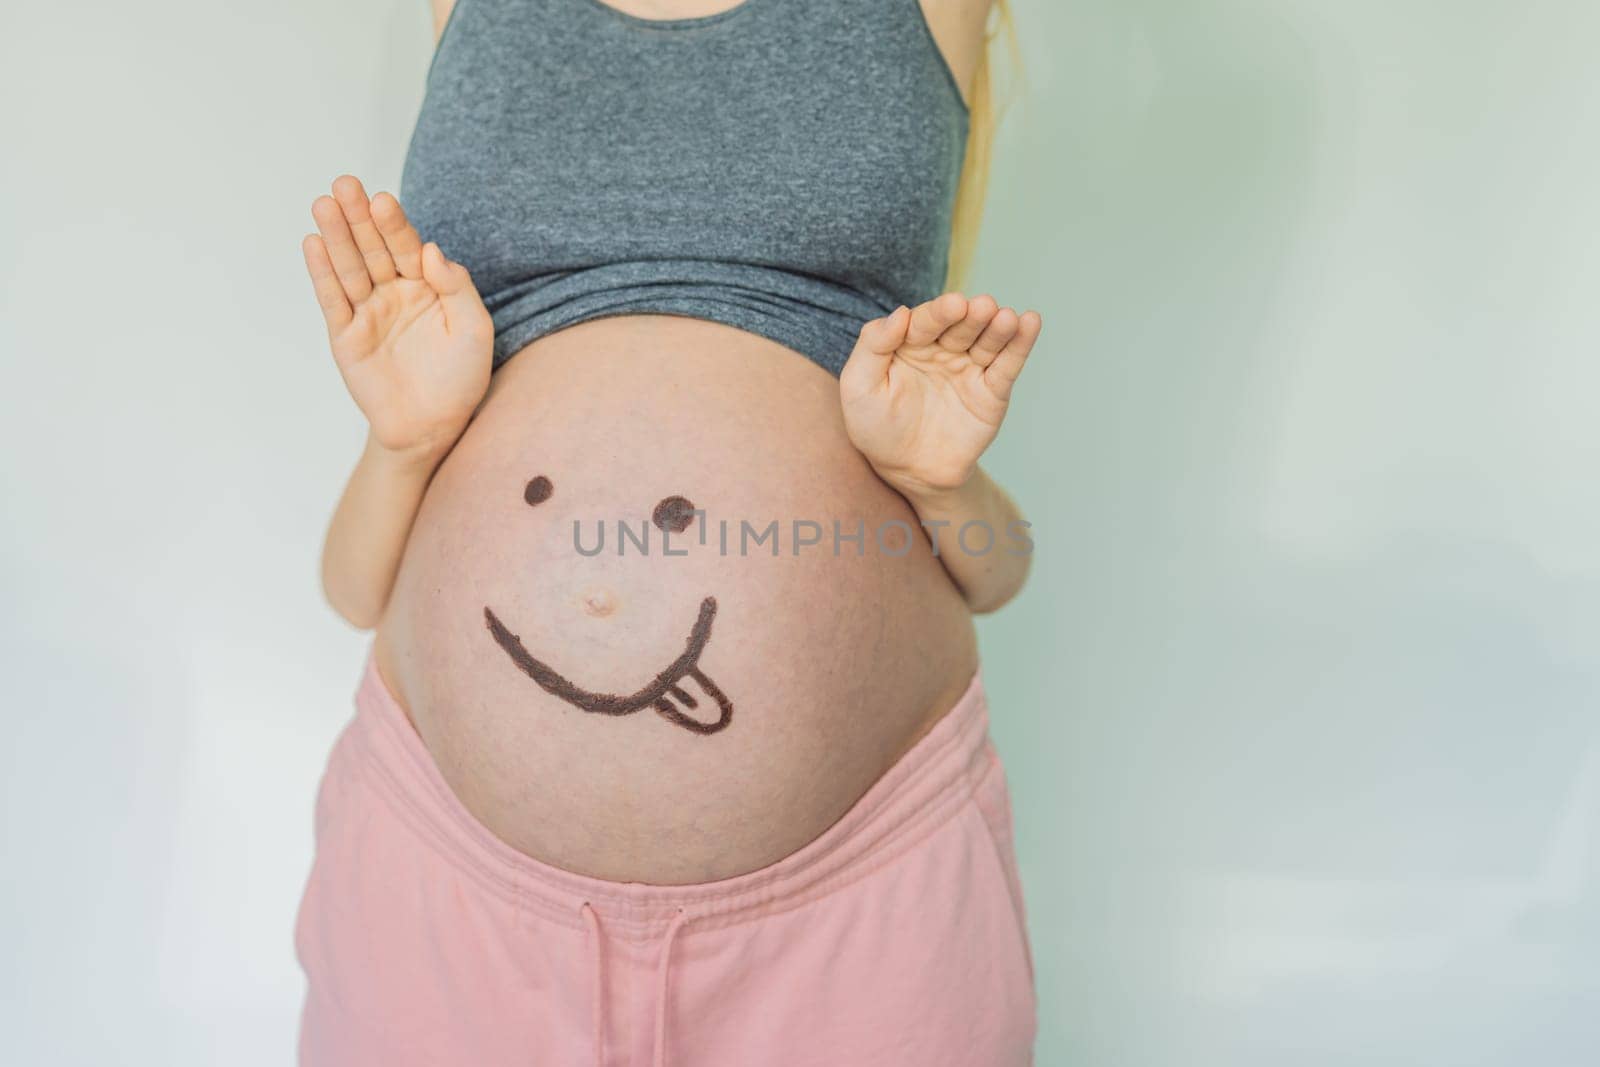 Adorable moment as a son adds a touch of joy to his mother's pregnancy, playfully drawing a funny face on her baby bump, creating cherished memories.